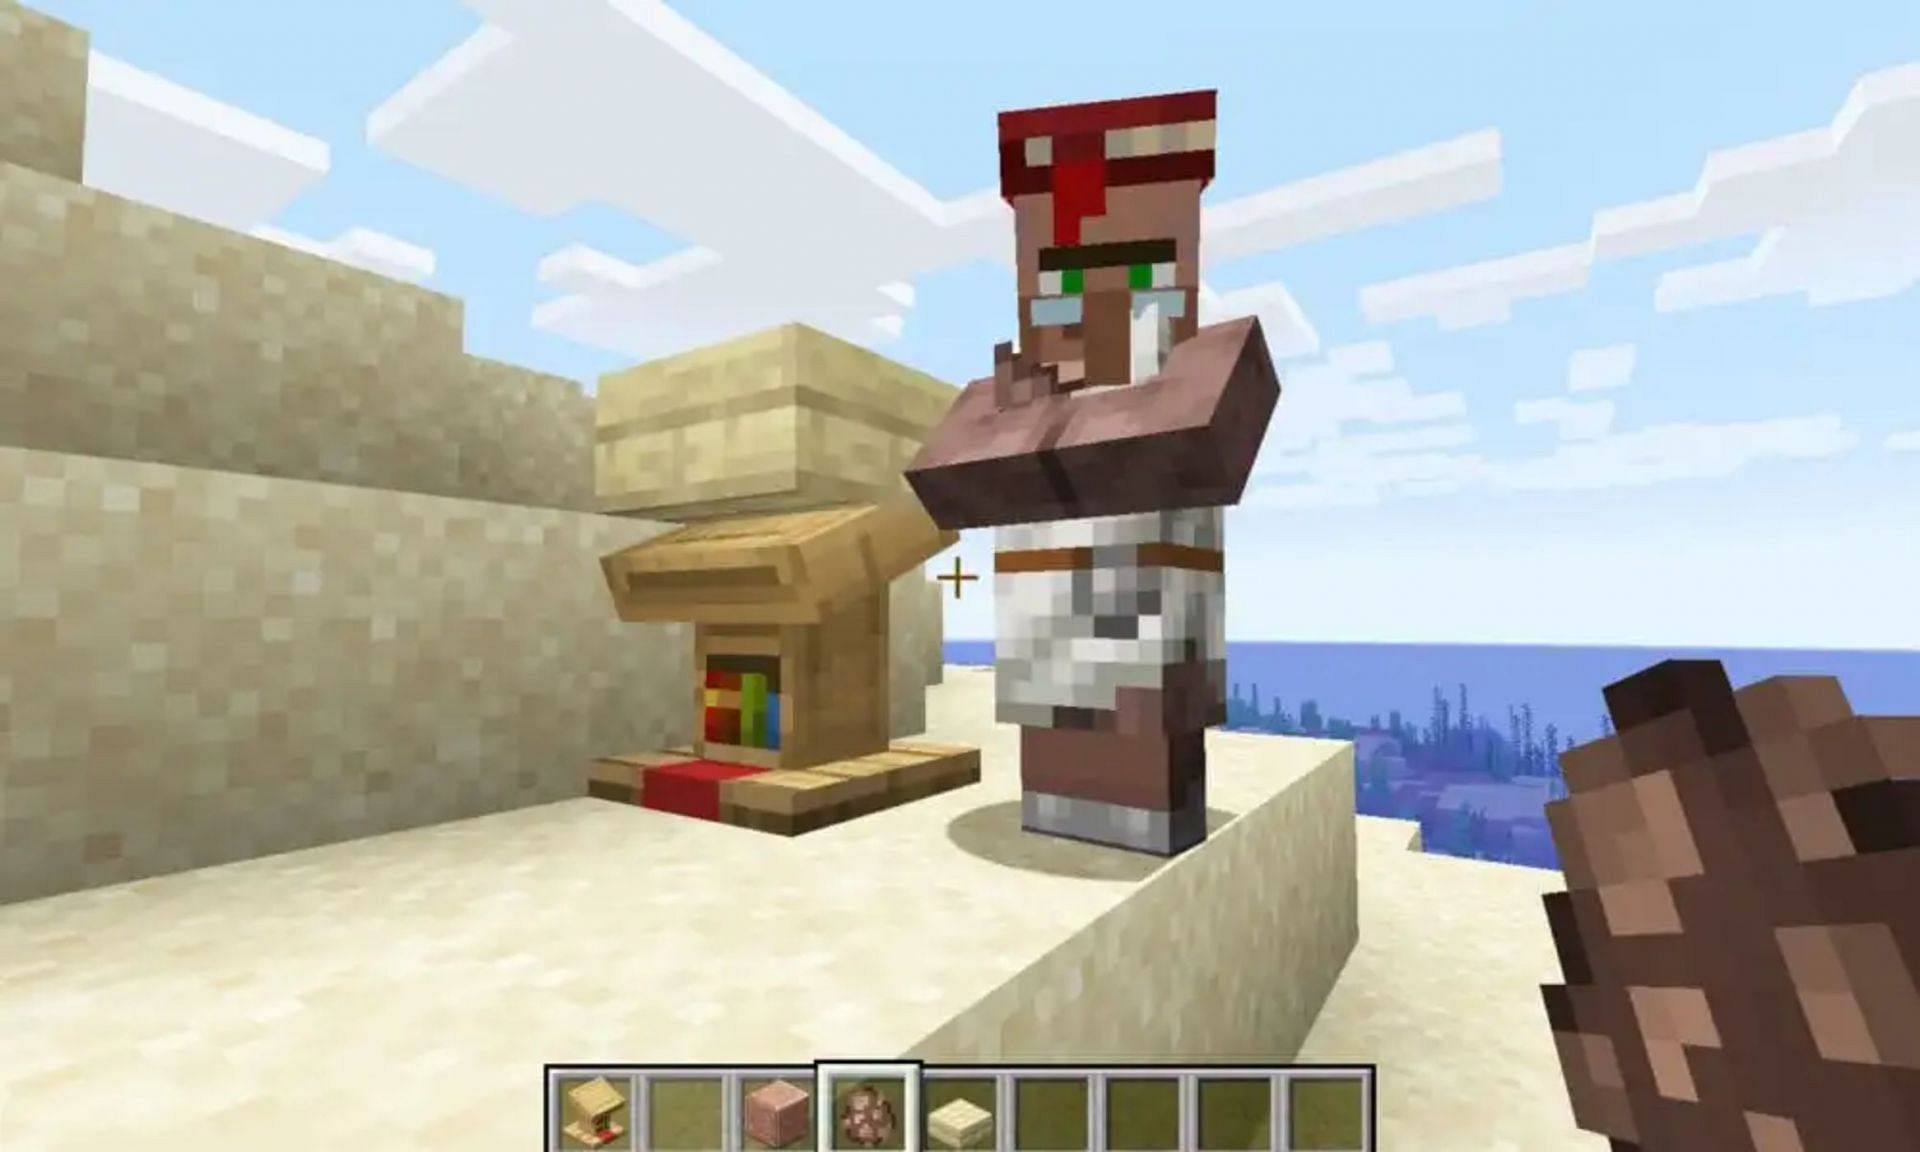 Librarian villagers tend to need paper for their work (Image via Mojang)